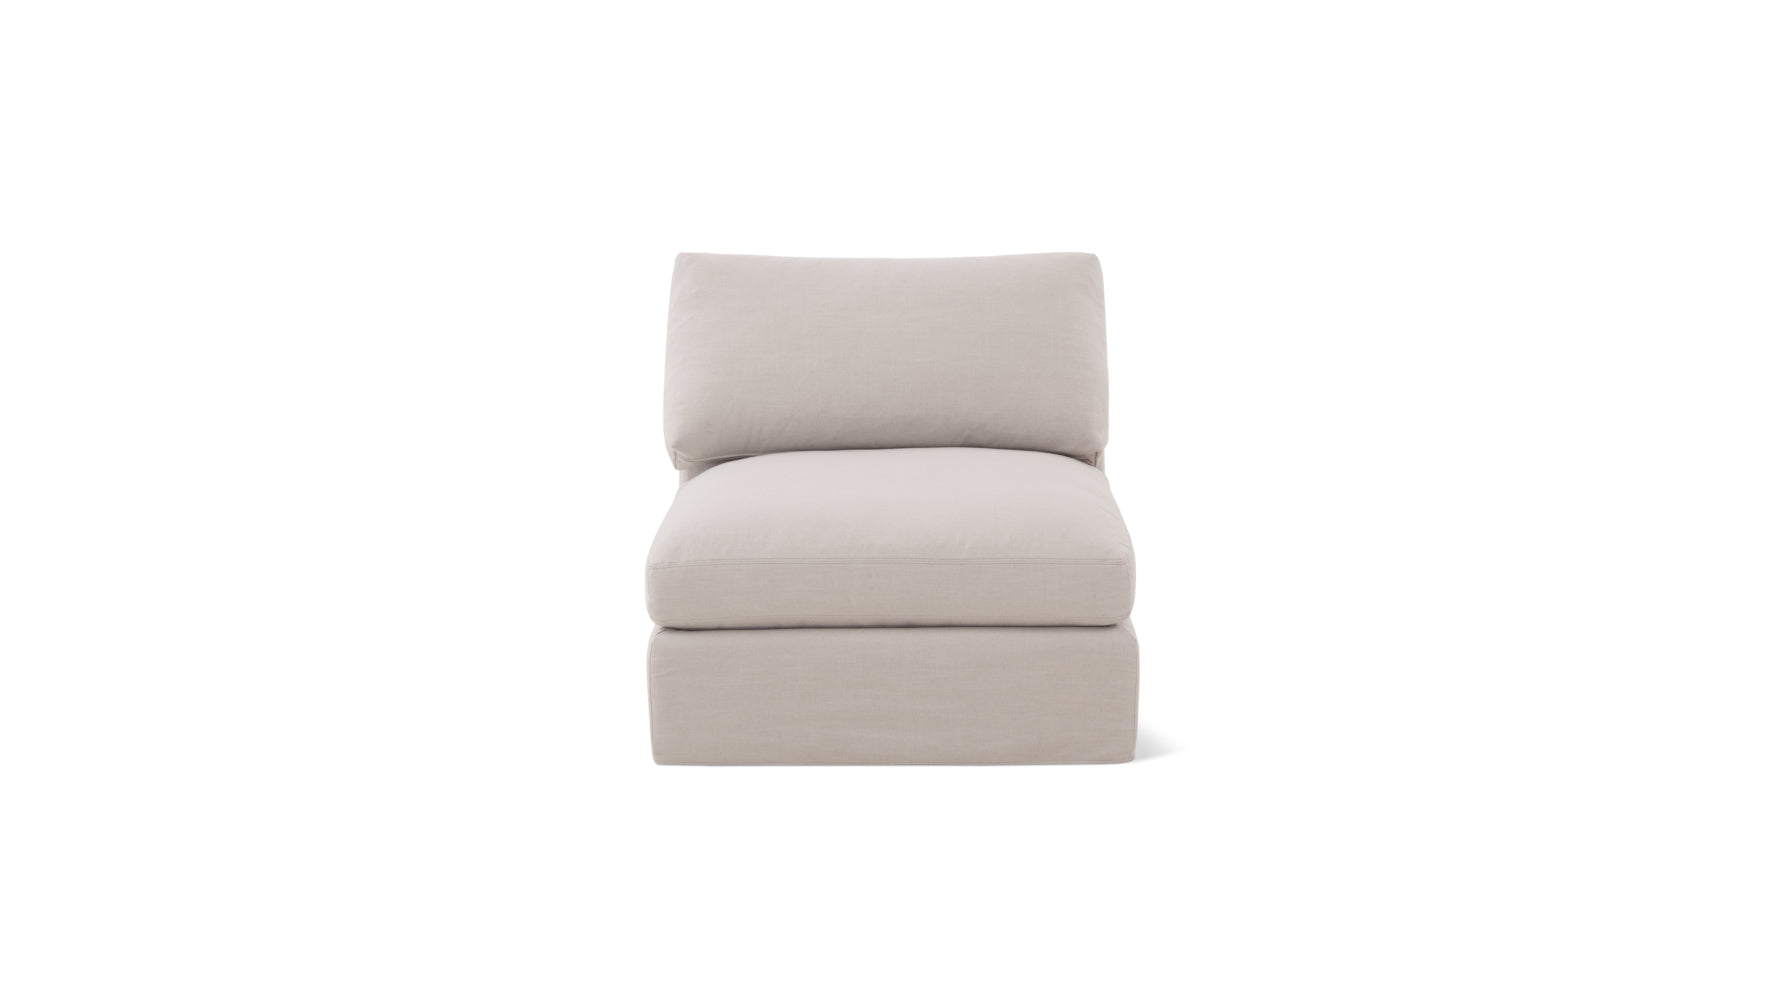 Slipcover - Get Together™ Armless Chair, Standard, Clay - Image 2